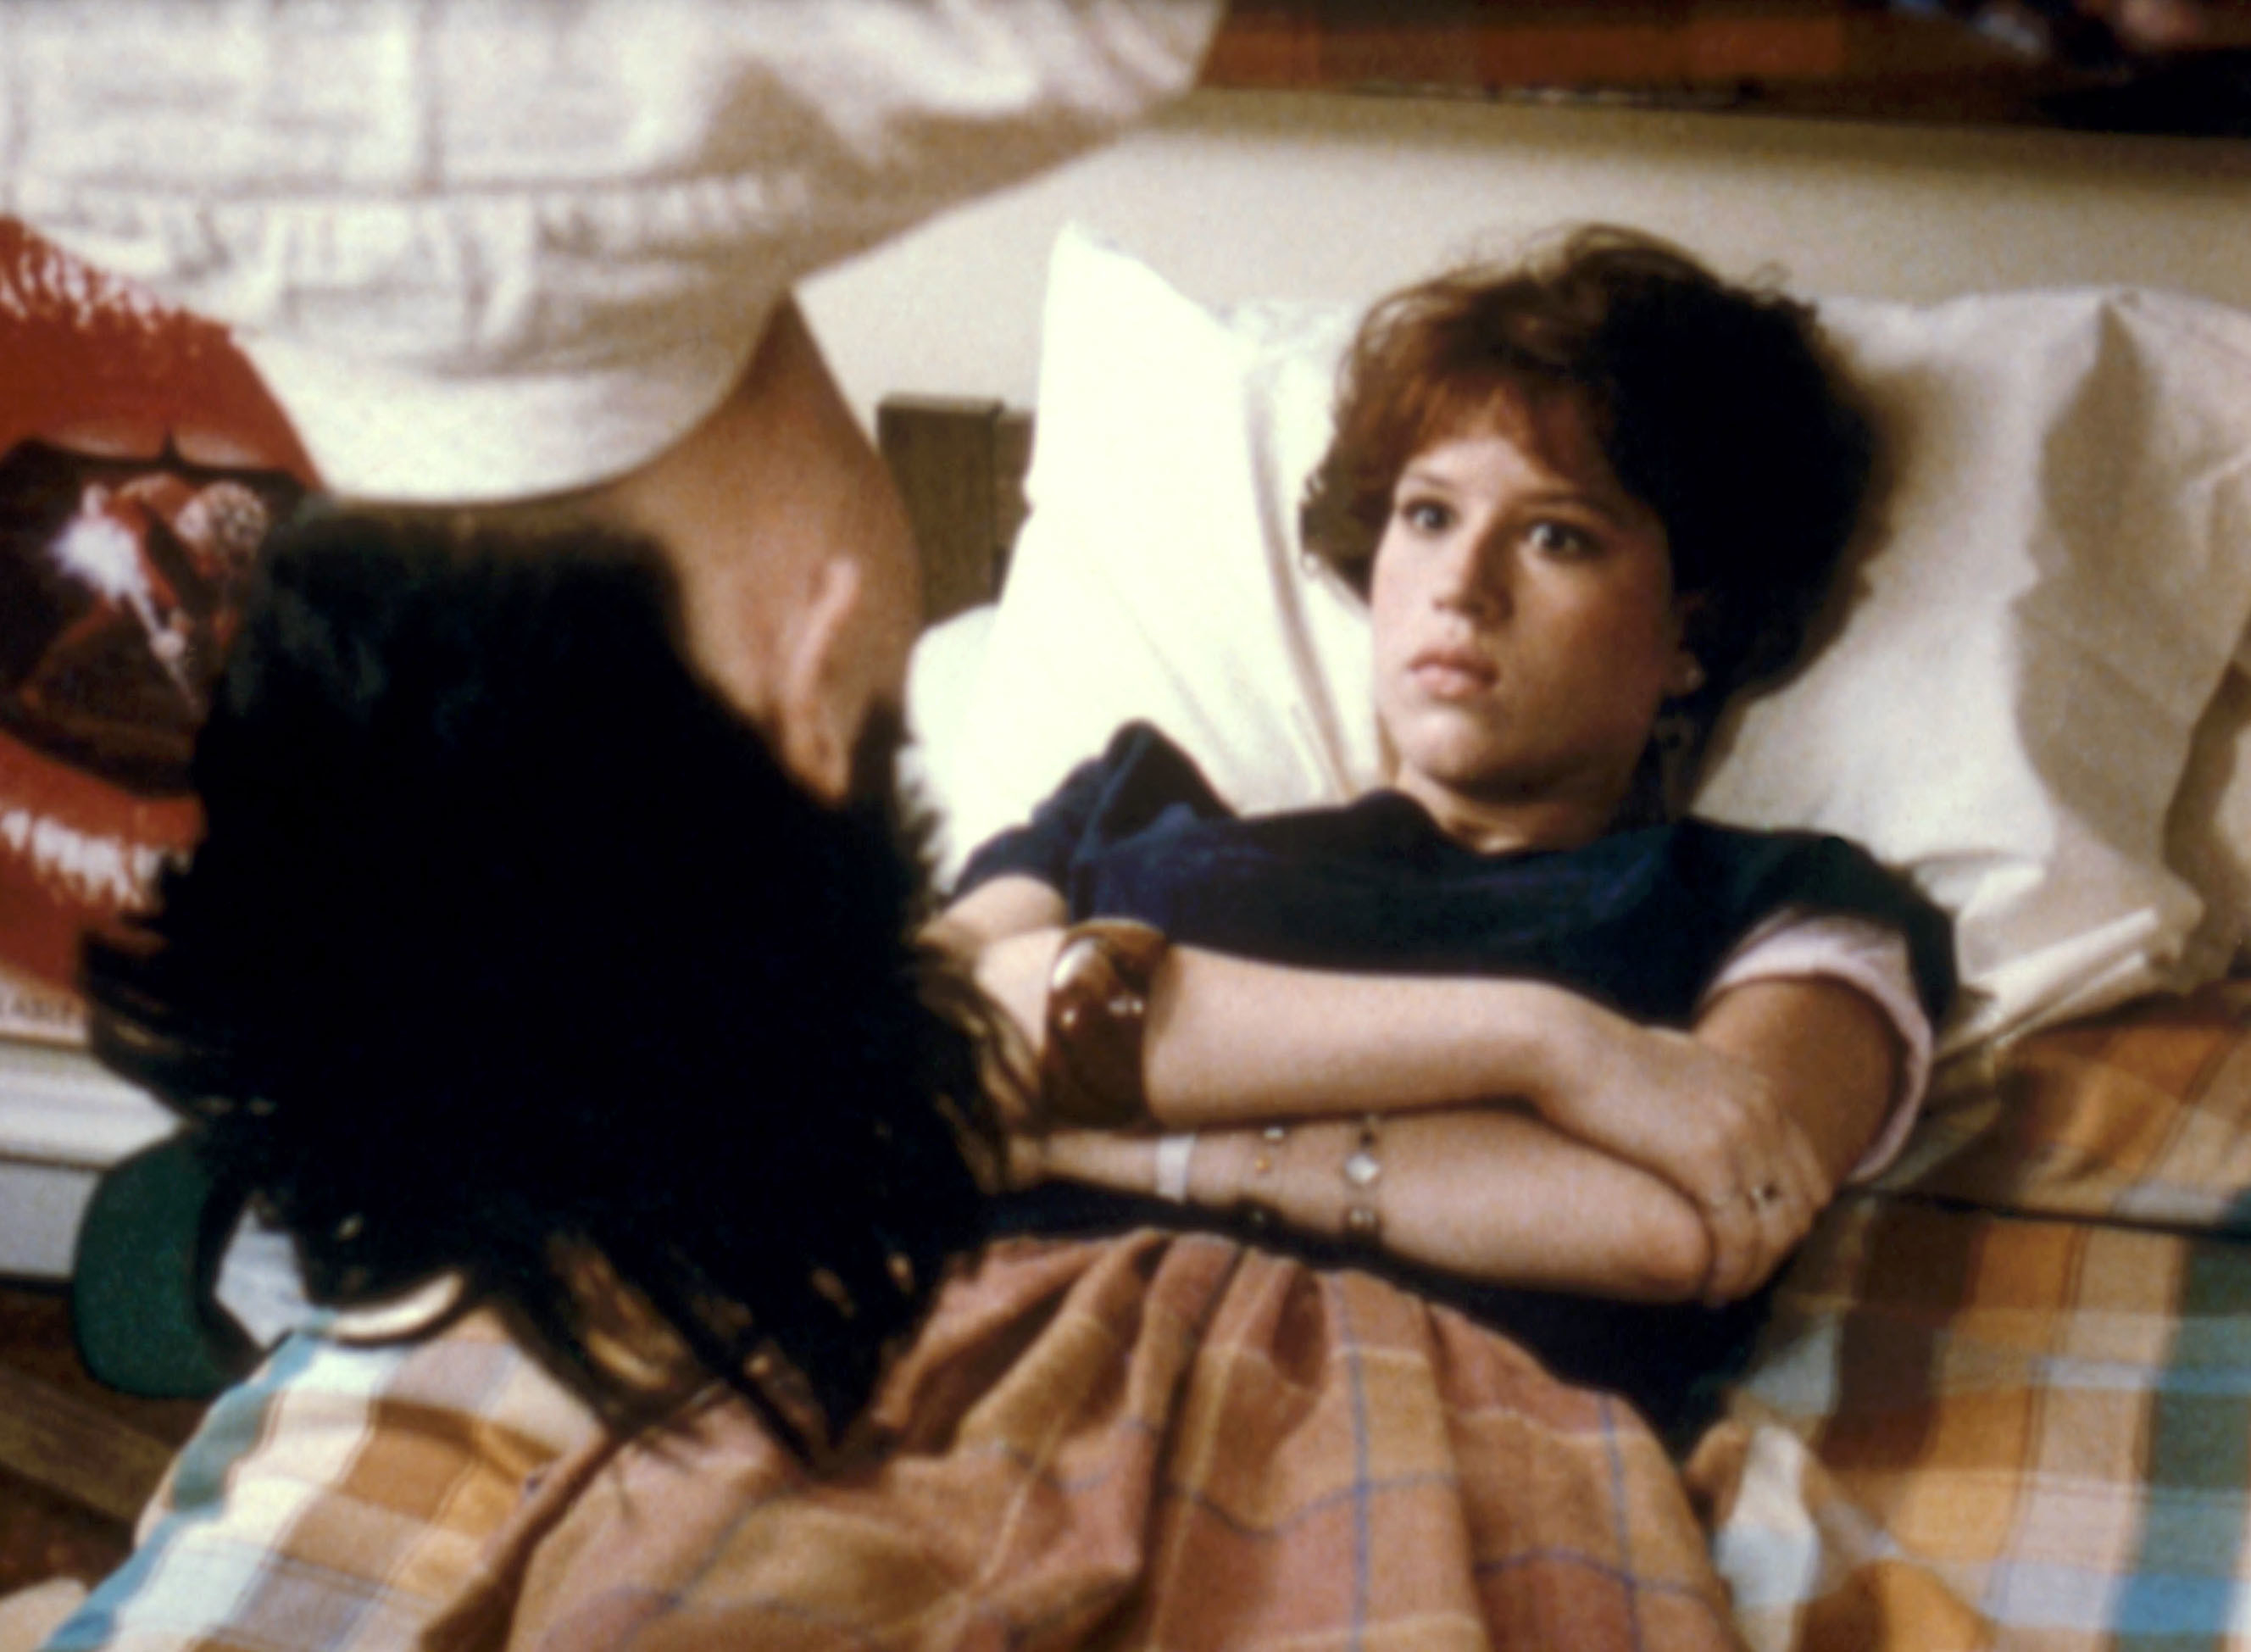 Molly Ringwald lays in bed as a person hands upside down in front of her